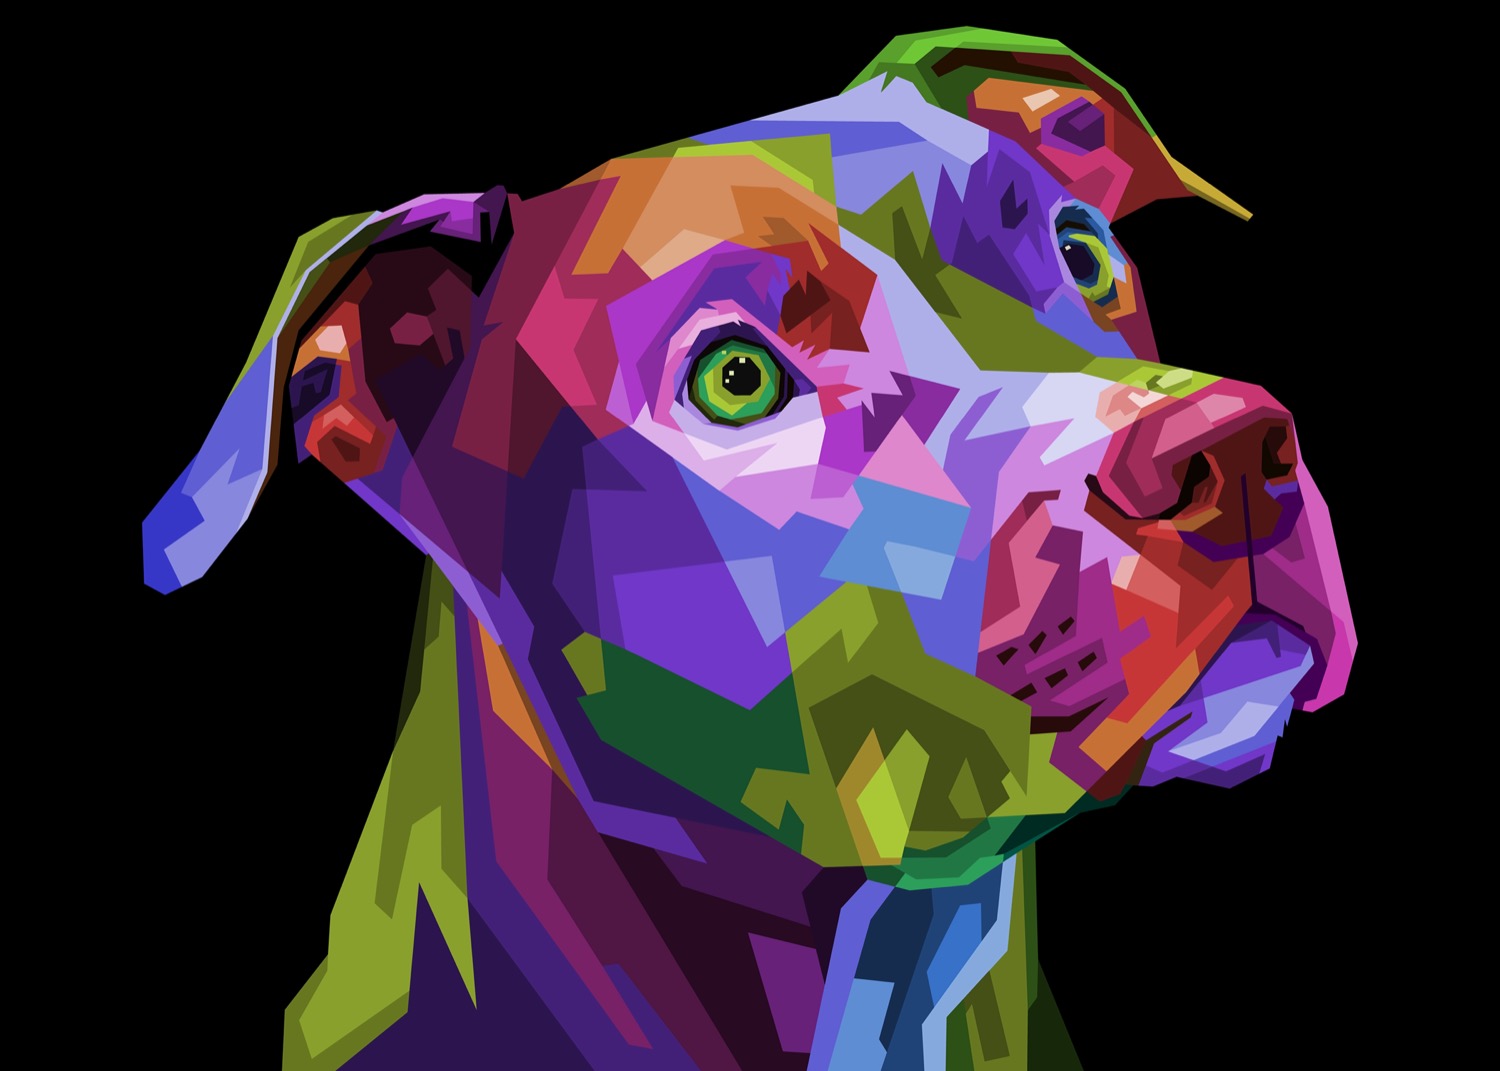 an illustration of a pitbull from the neck up. its skin is made up multicolored geometric patterns